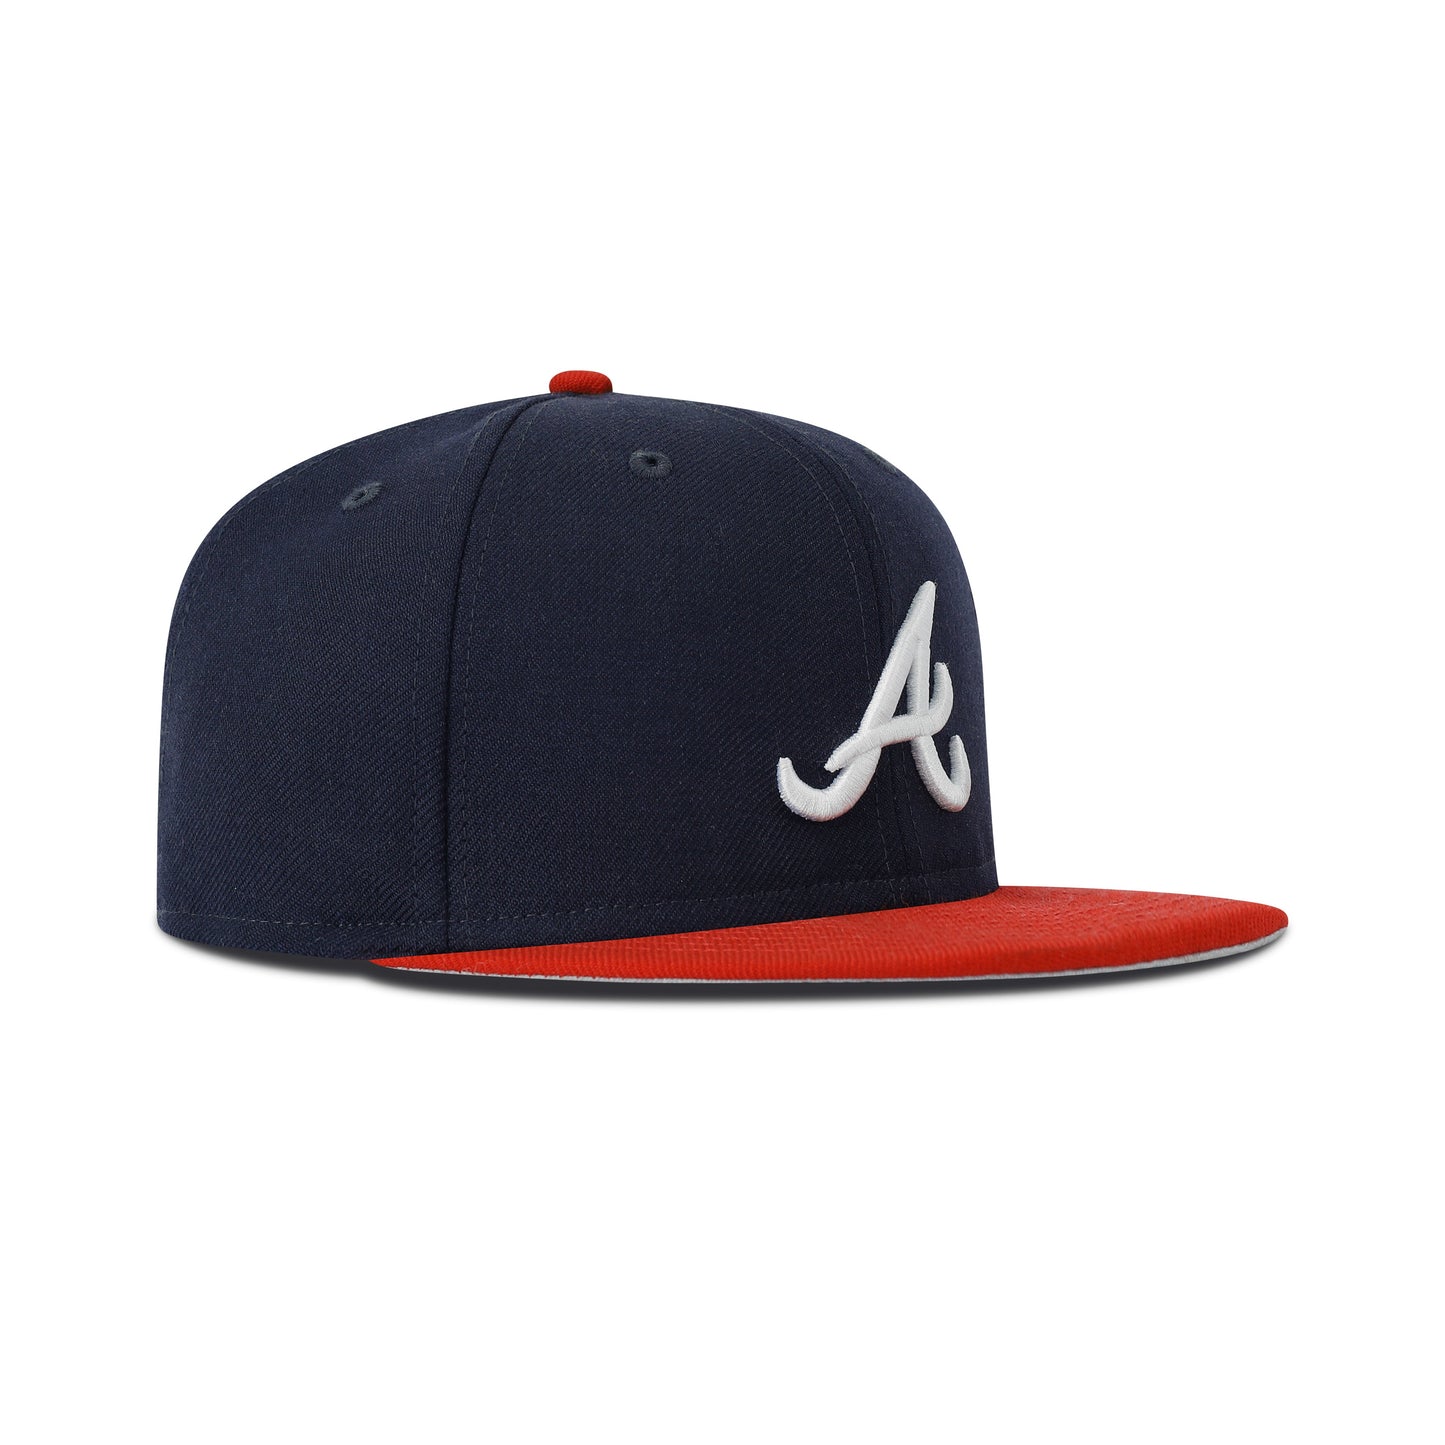 New Era Atlanta Braves Fitted Grey Bottom "Navy Red" (1995 World Series Embroidery)